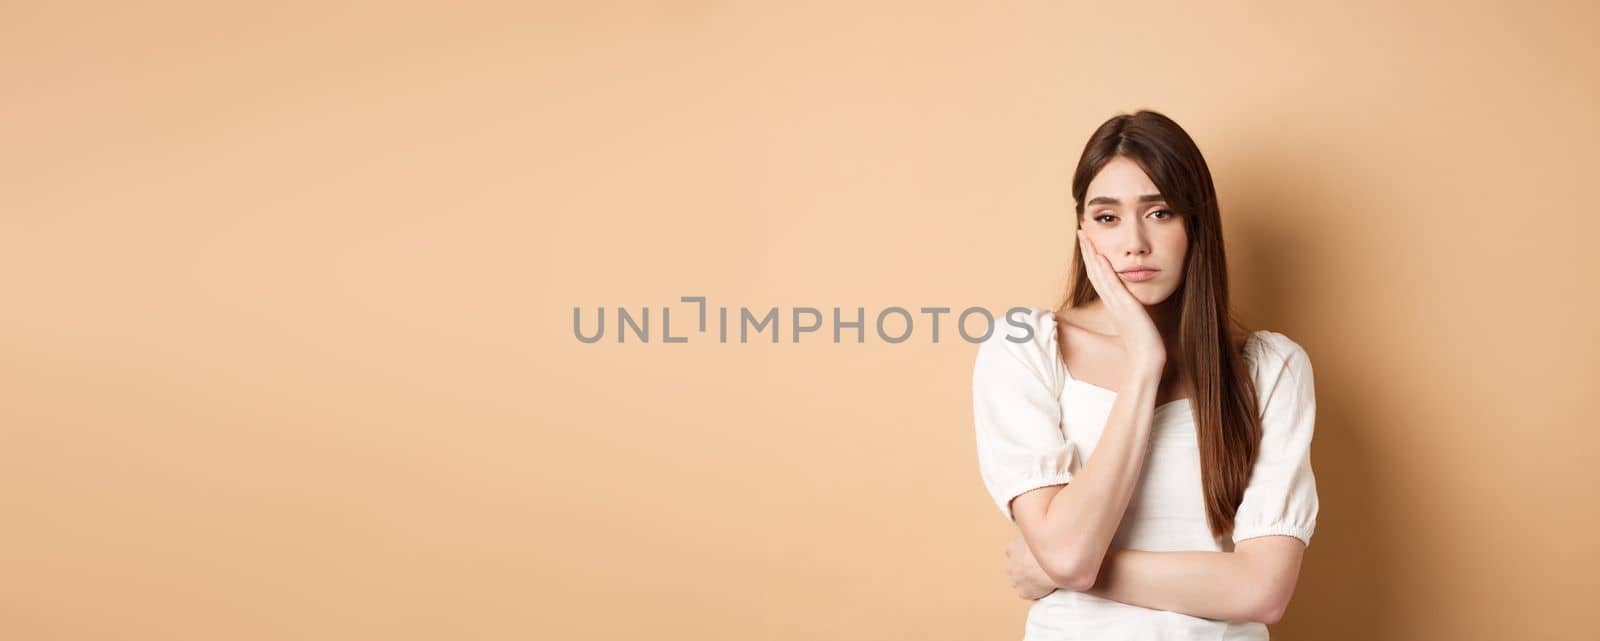 Bored and tired young woman looking indifferent at camera, lean face on palm and stare at camera unamused, standing sleepy on beige background.